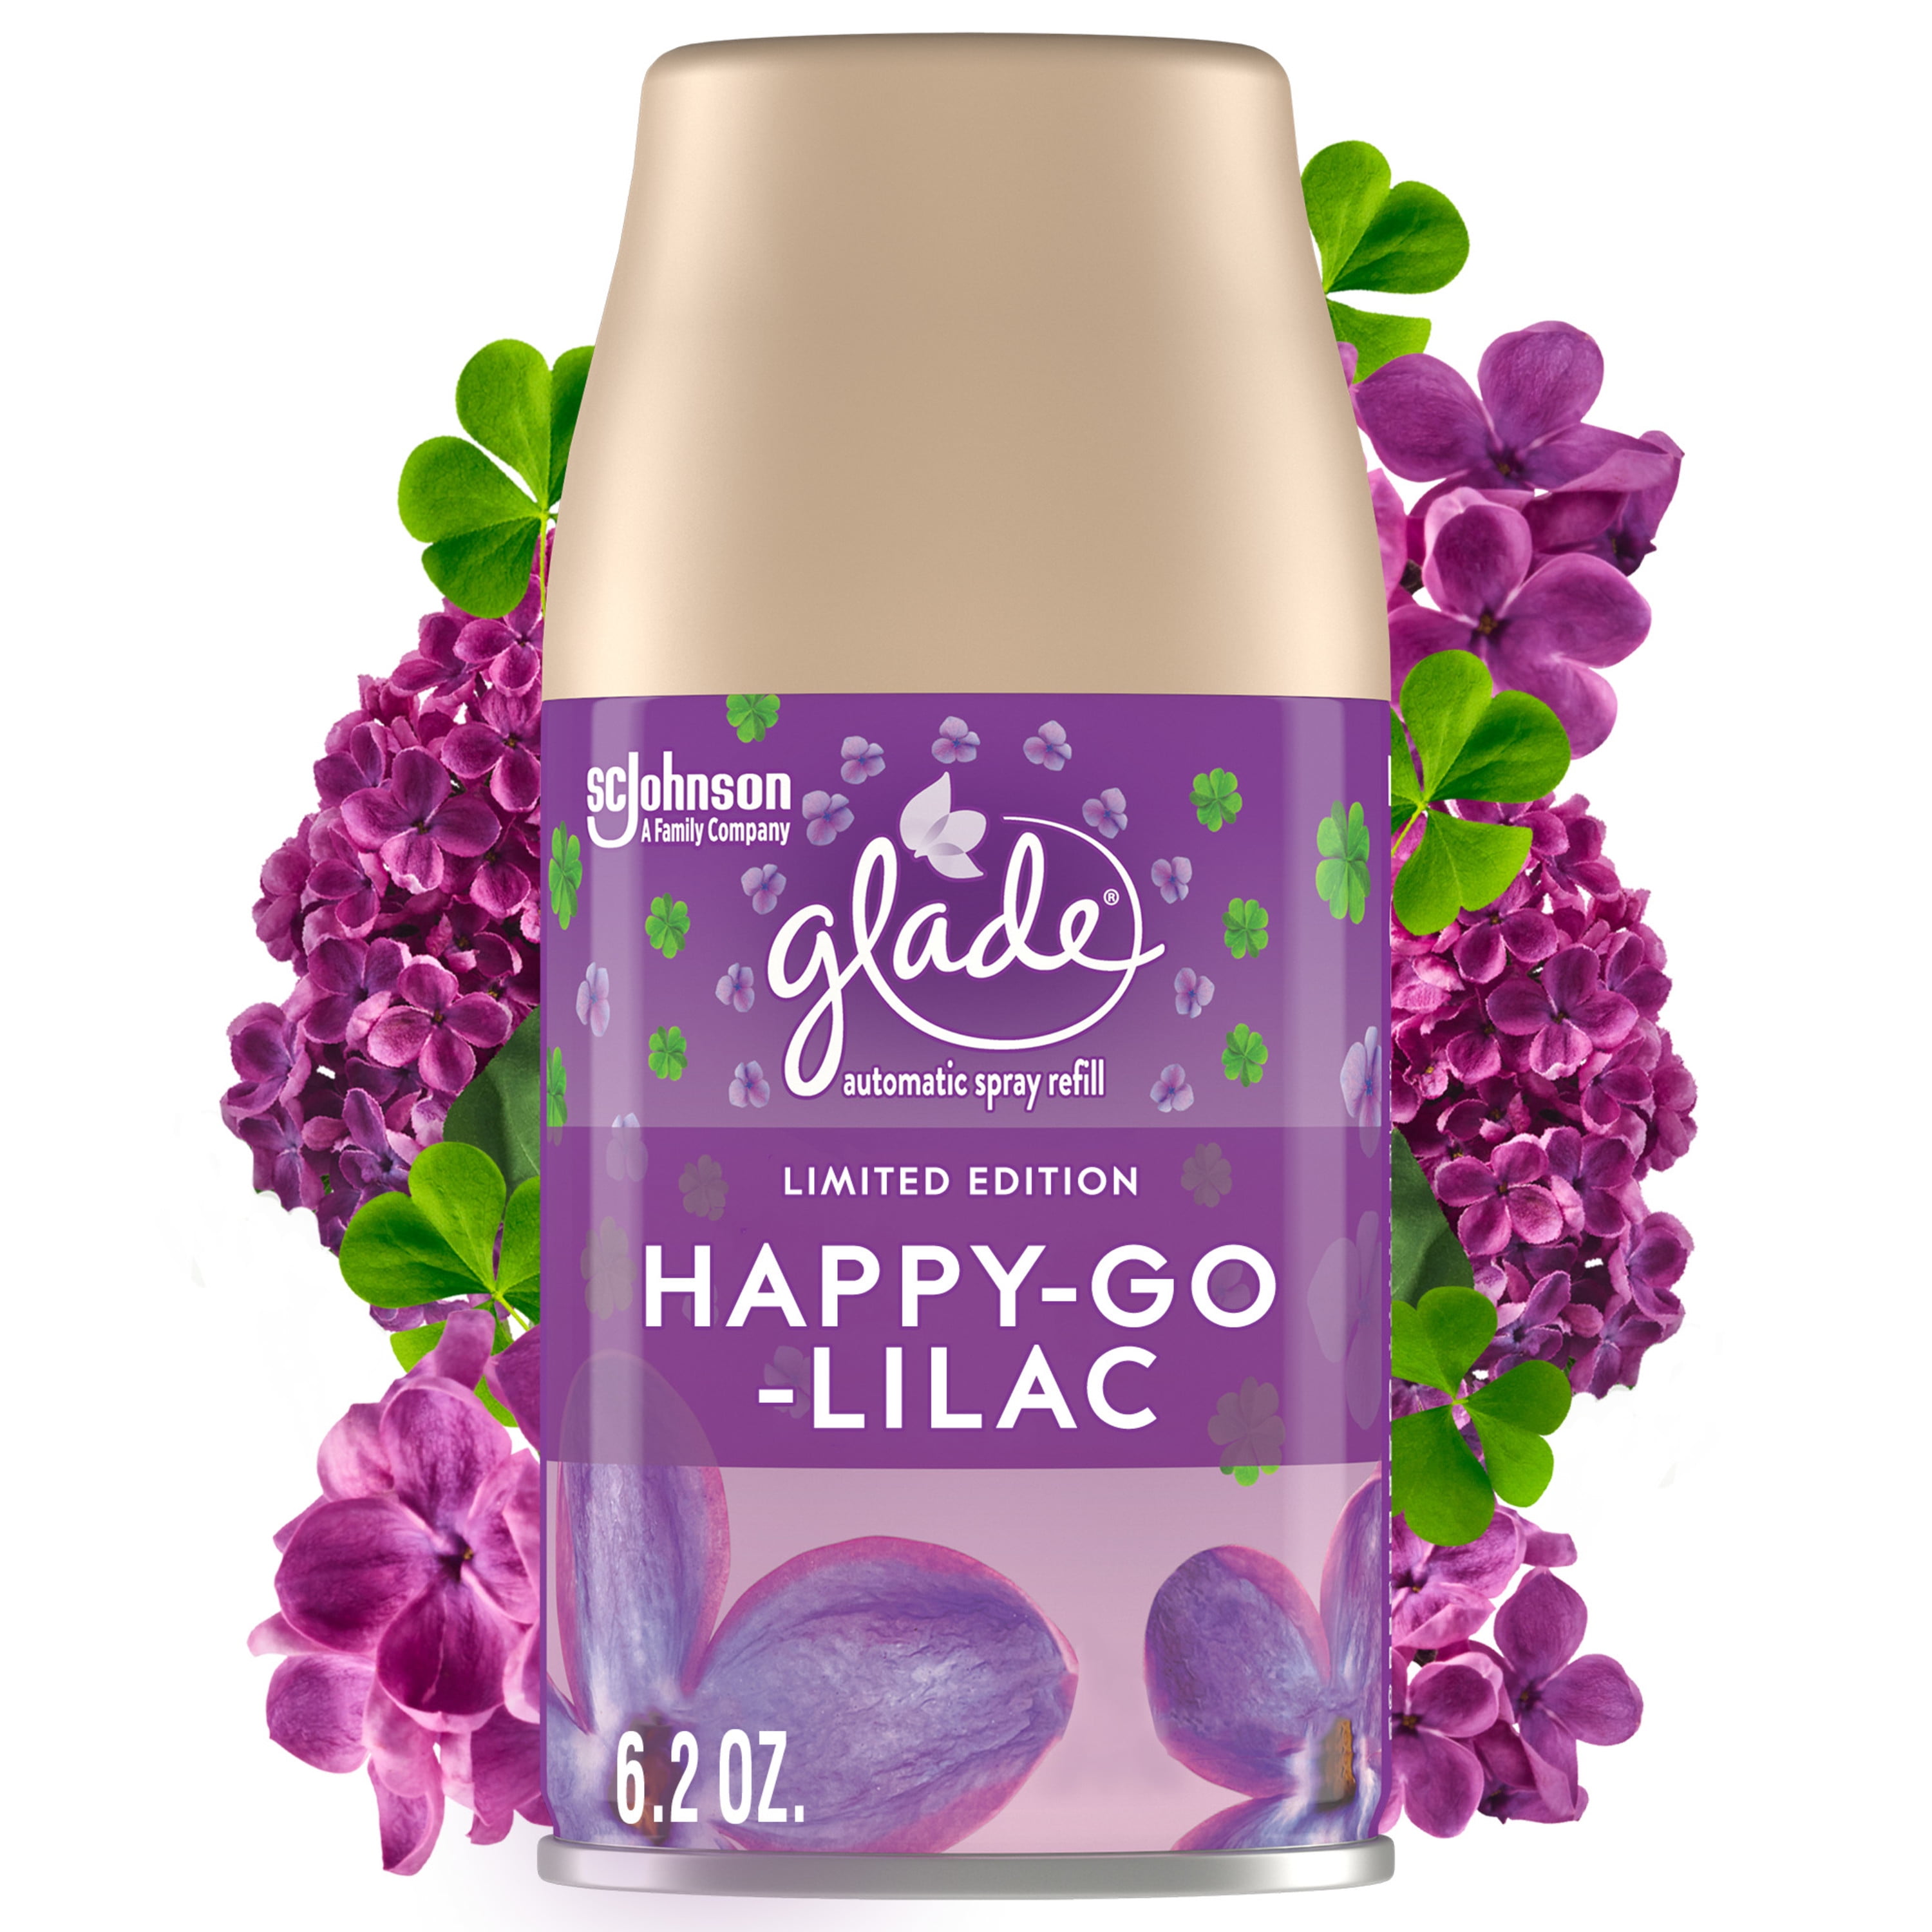 Glade Automatic Spray Refill, Automatic Air Freshener, Happy-Go-Lilac  Scent, Infused with Essential Oils, Spring Limited Edition Fragrance,  Positive